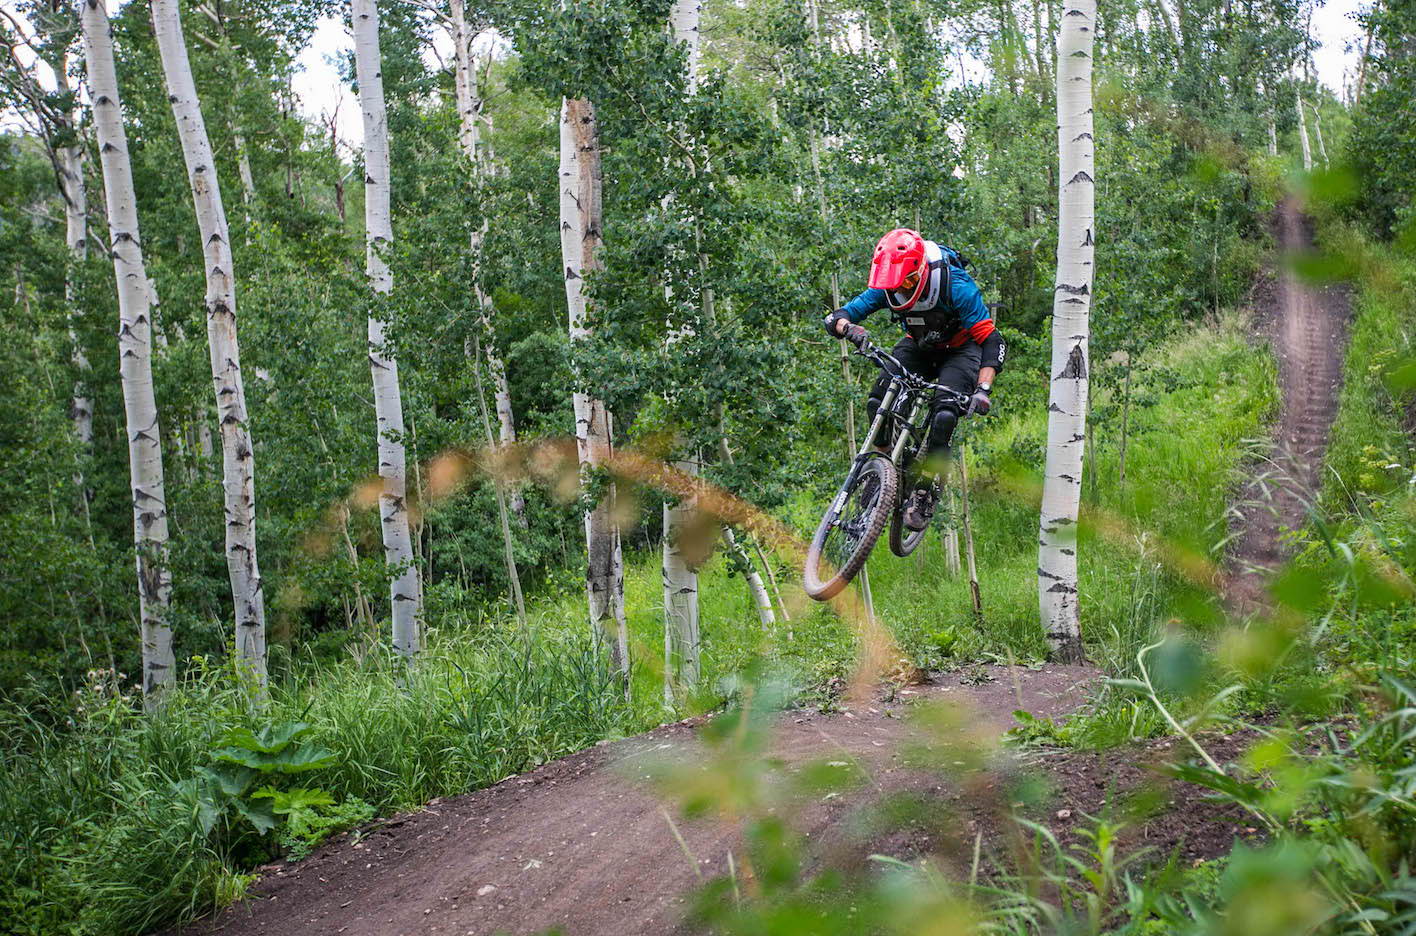 A mountain biker catching a bit of air in the forest.